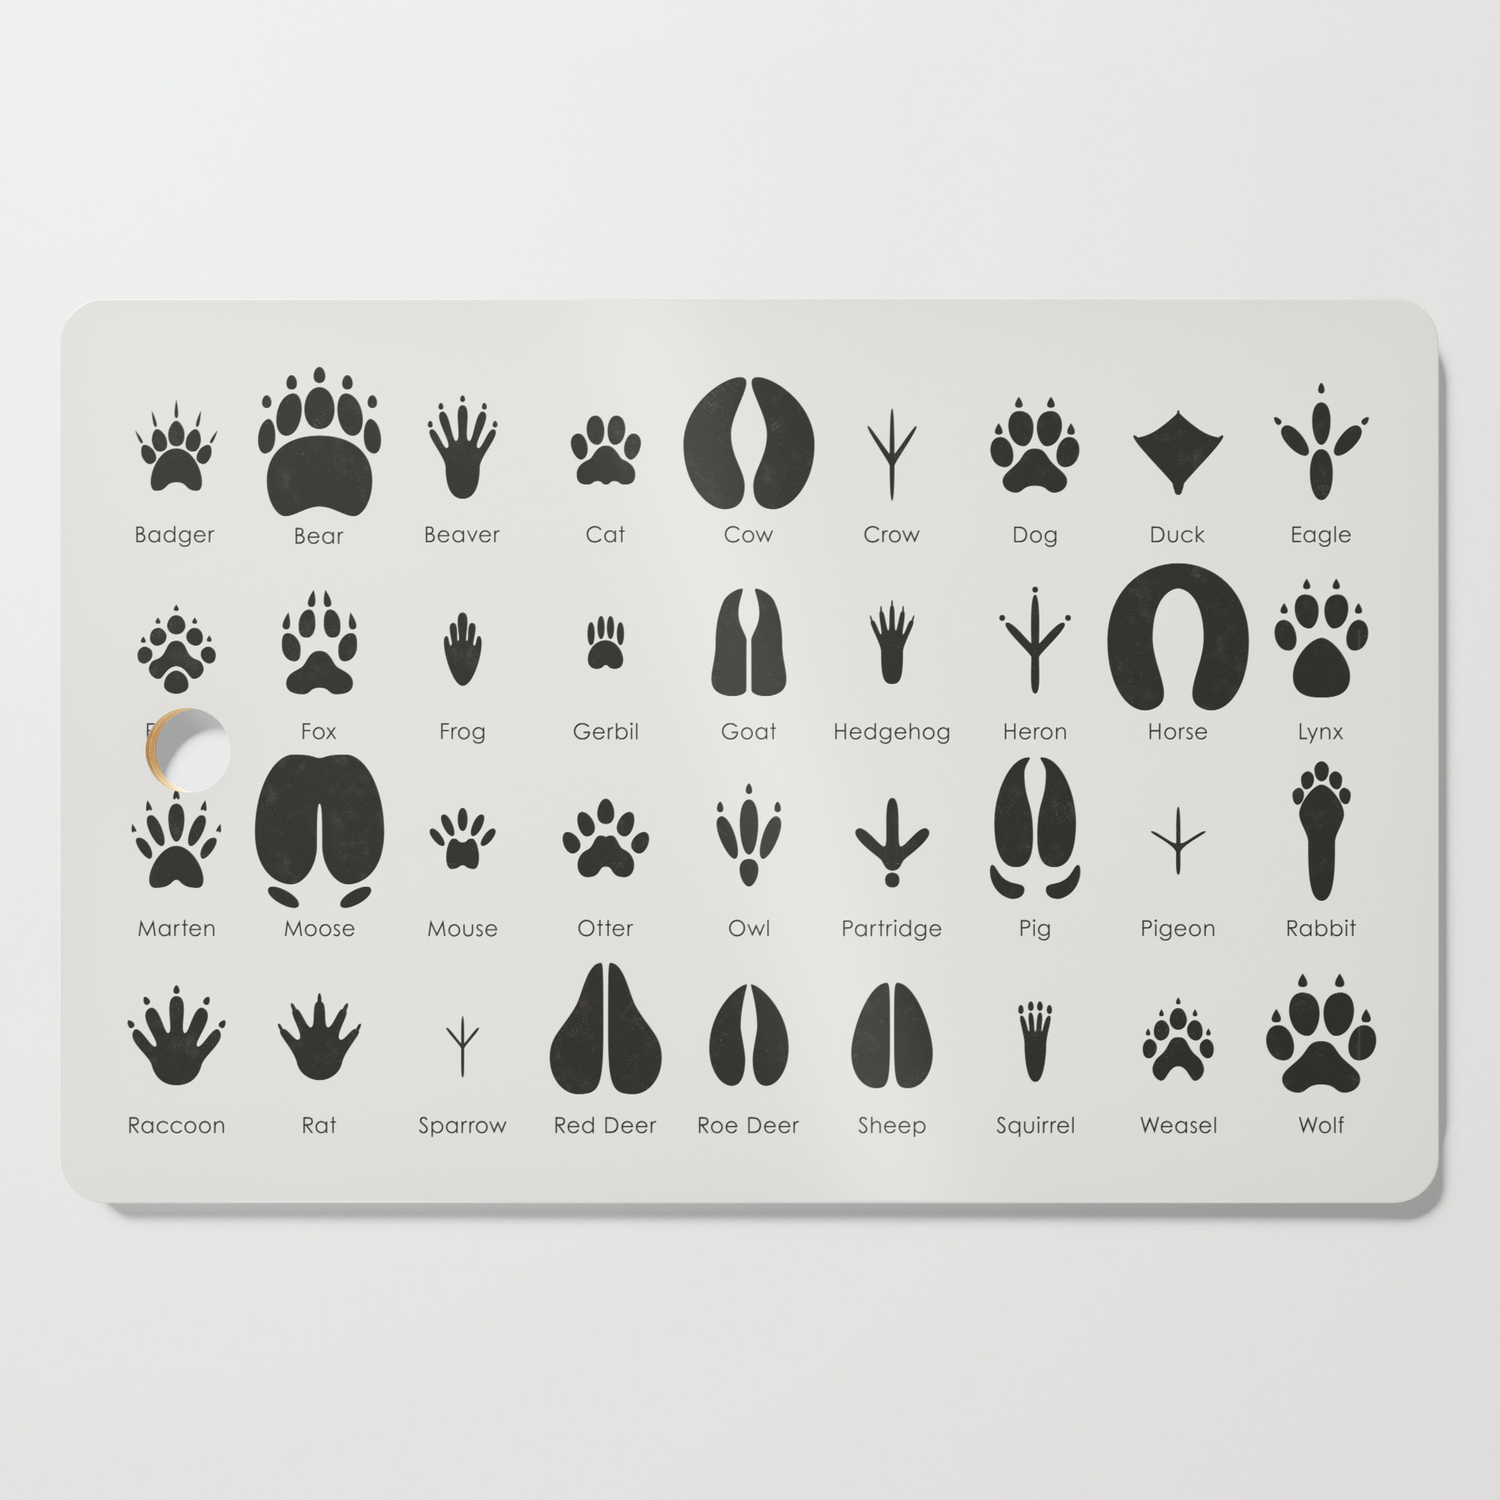 Animal Tracks Identification Chart or Guide Cutting Board by Iris Luckhaus  | Society6